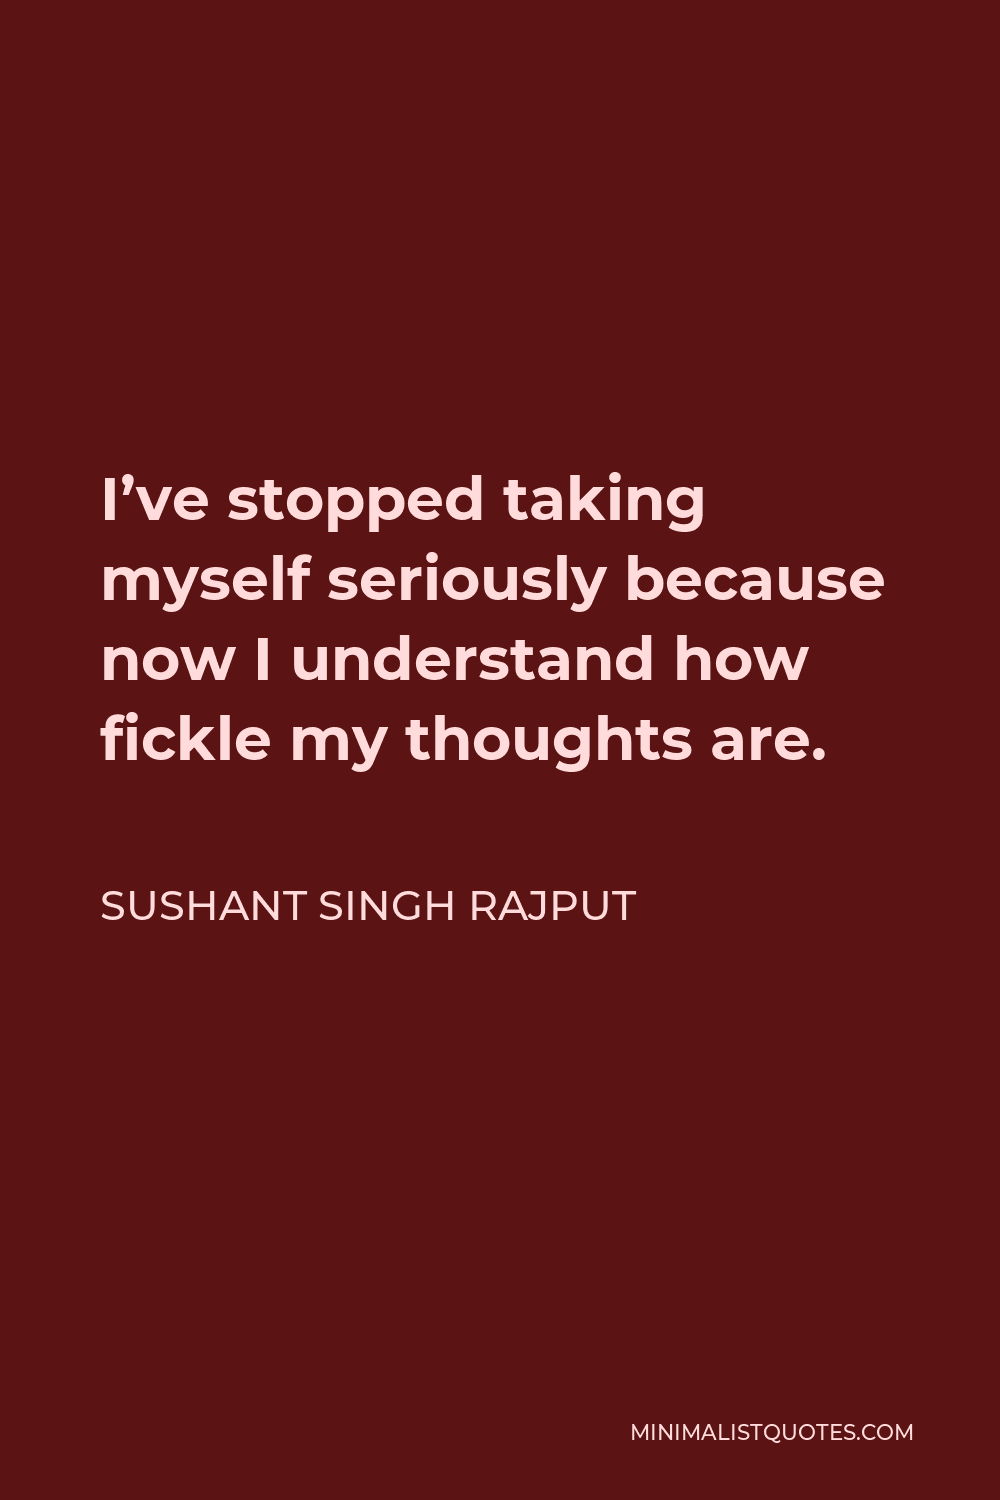 Sushant Singh Rajput Quote - I’ve stopped taking myself seriously because now I understand how fickle my thoughts are.